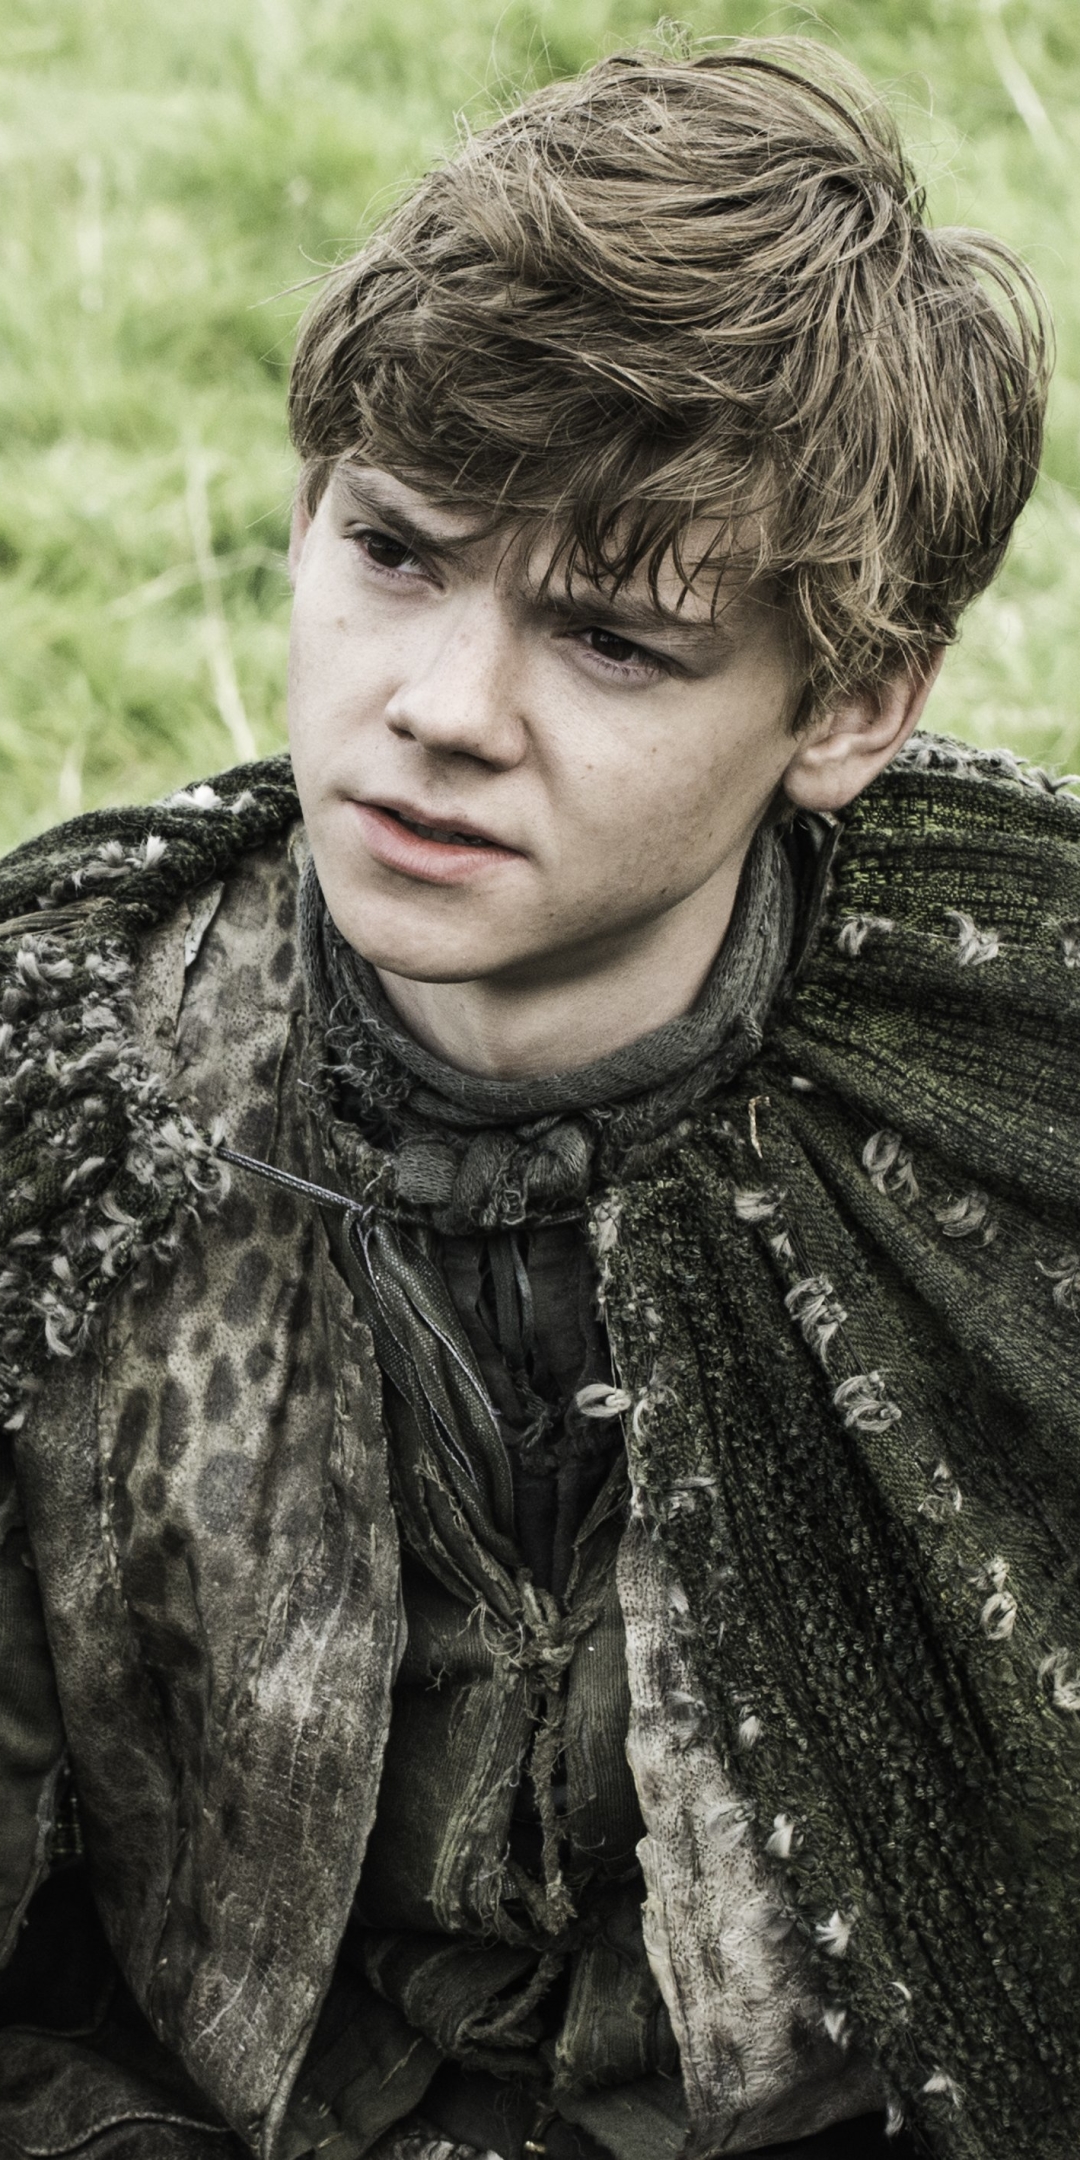 tv show, game of thrones, thomas brodie sangster, jojen reed